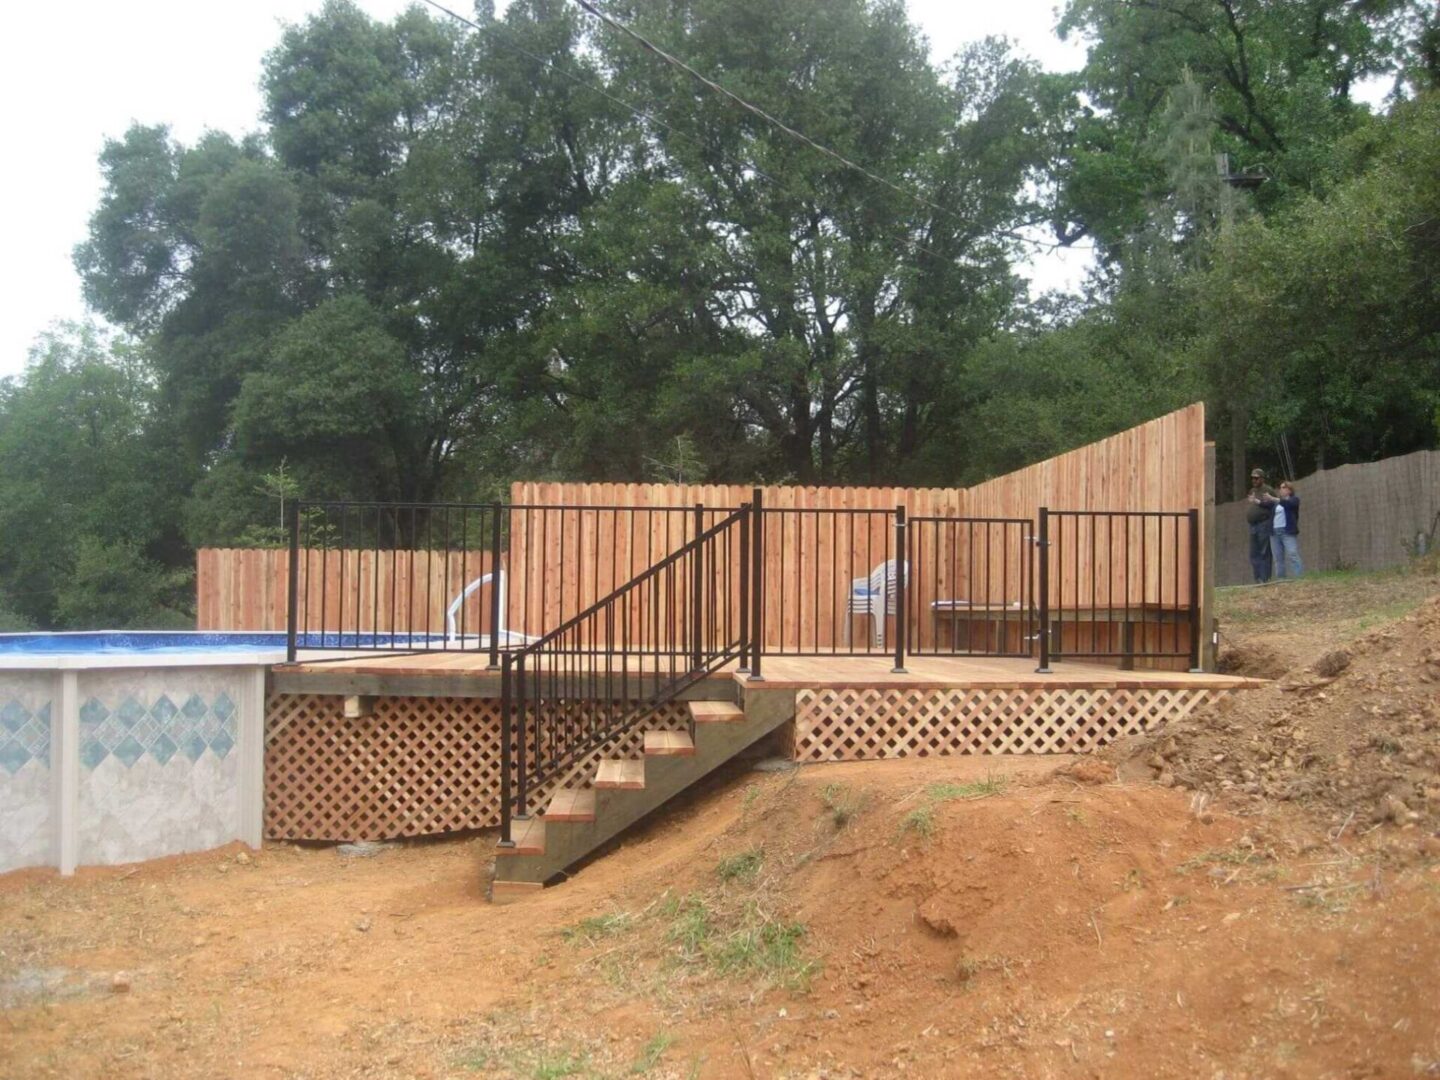 A pool with stairs and fence in the background.